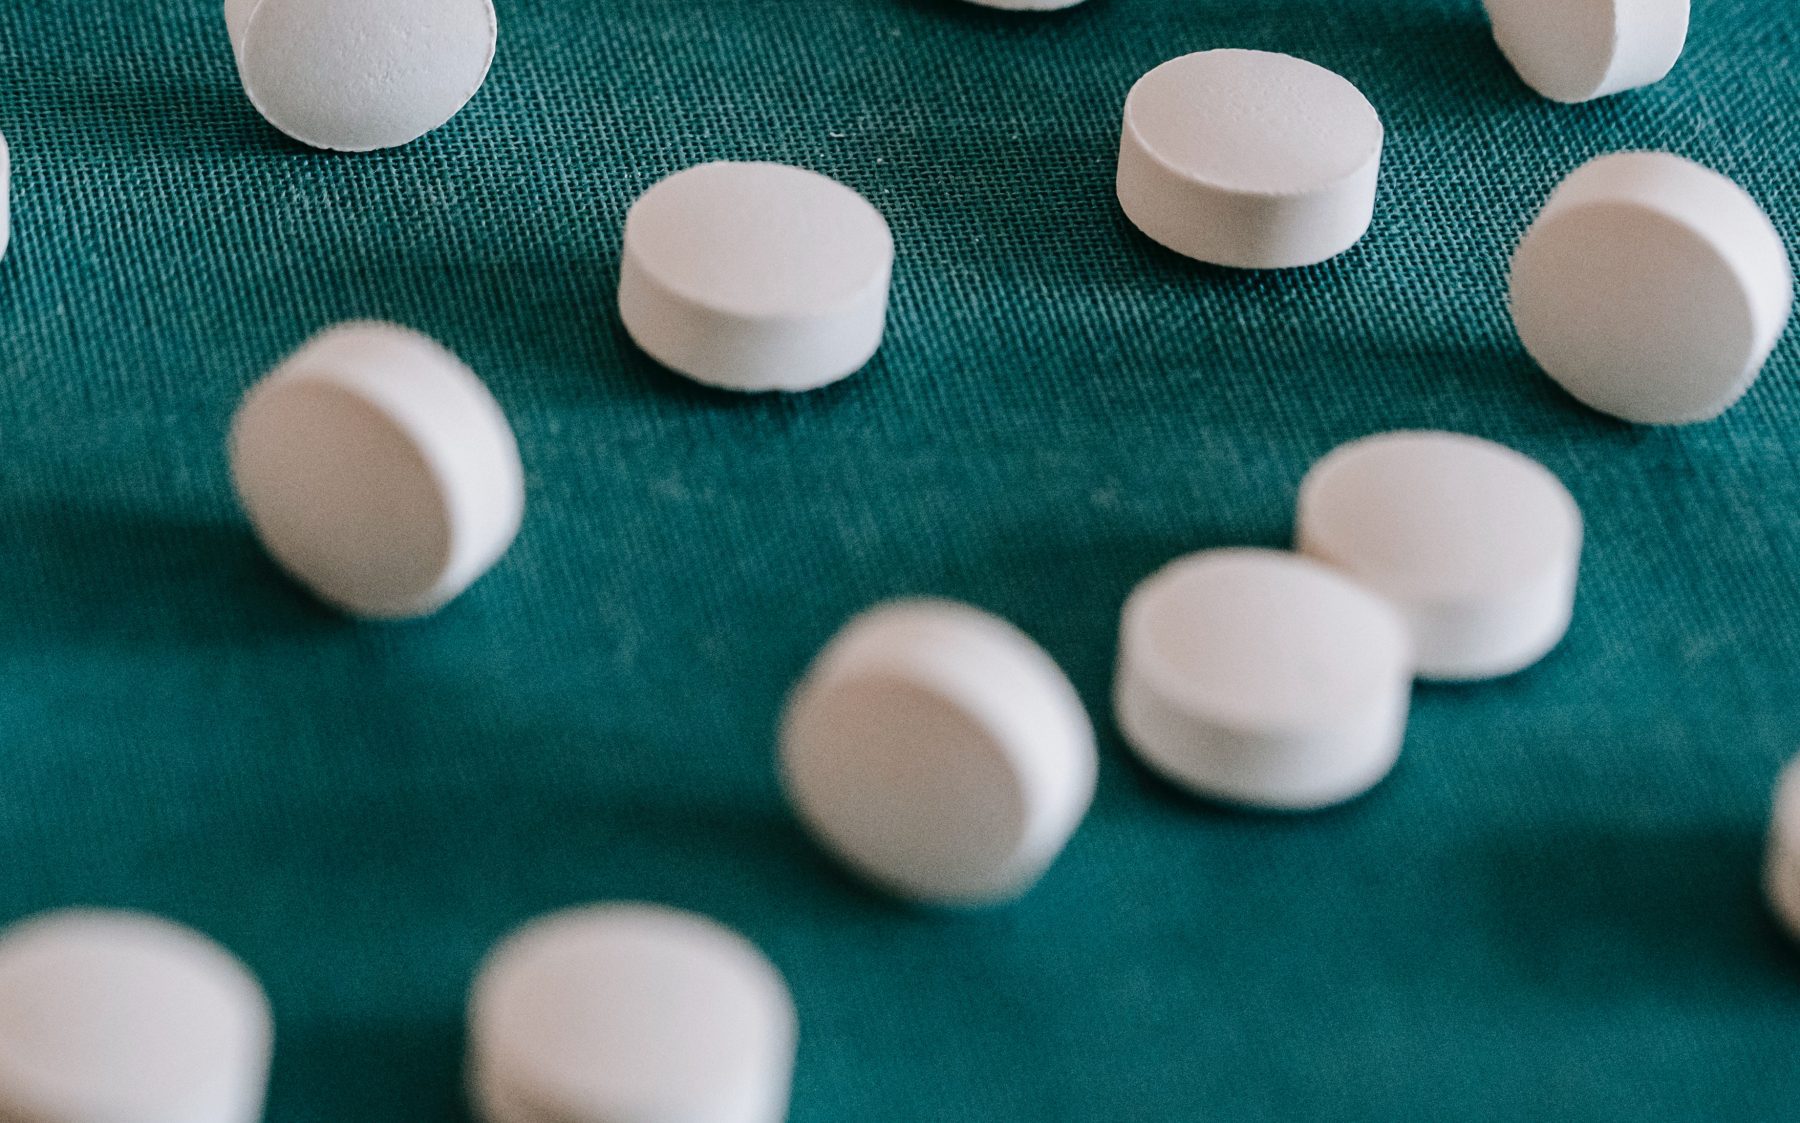 White pills on a green background.